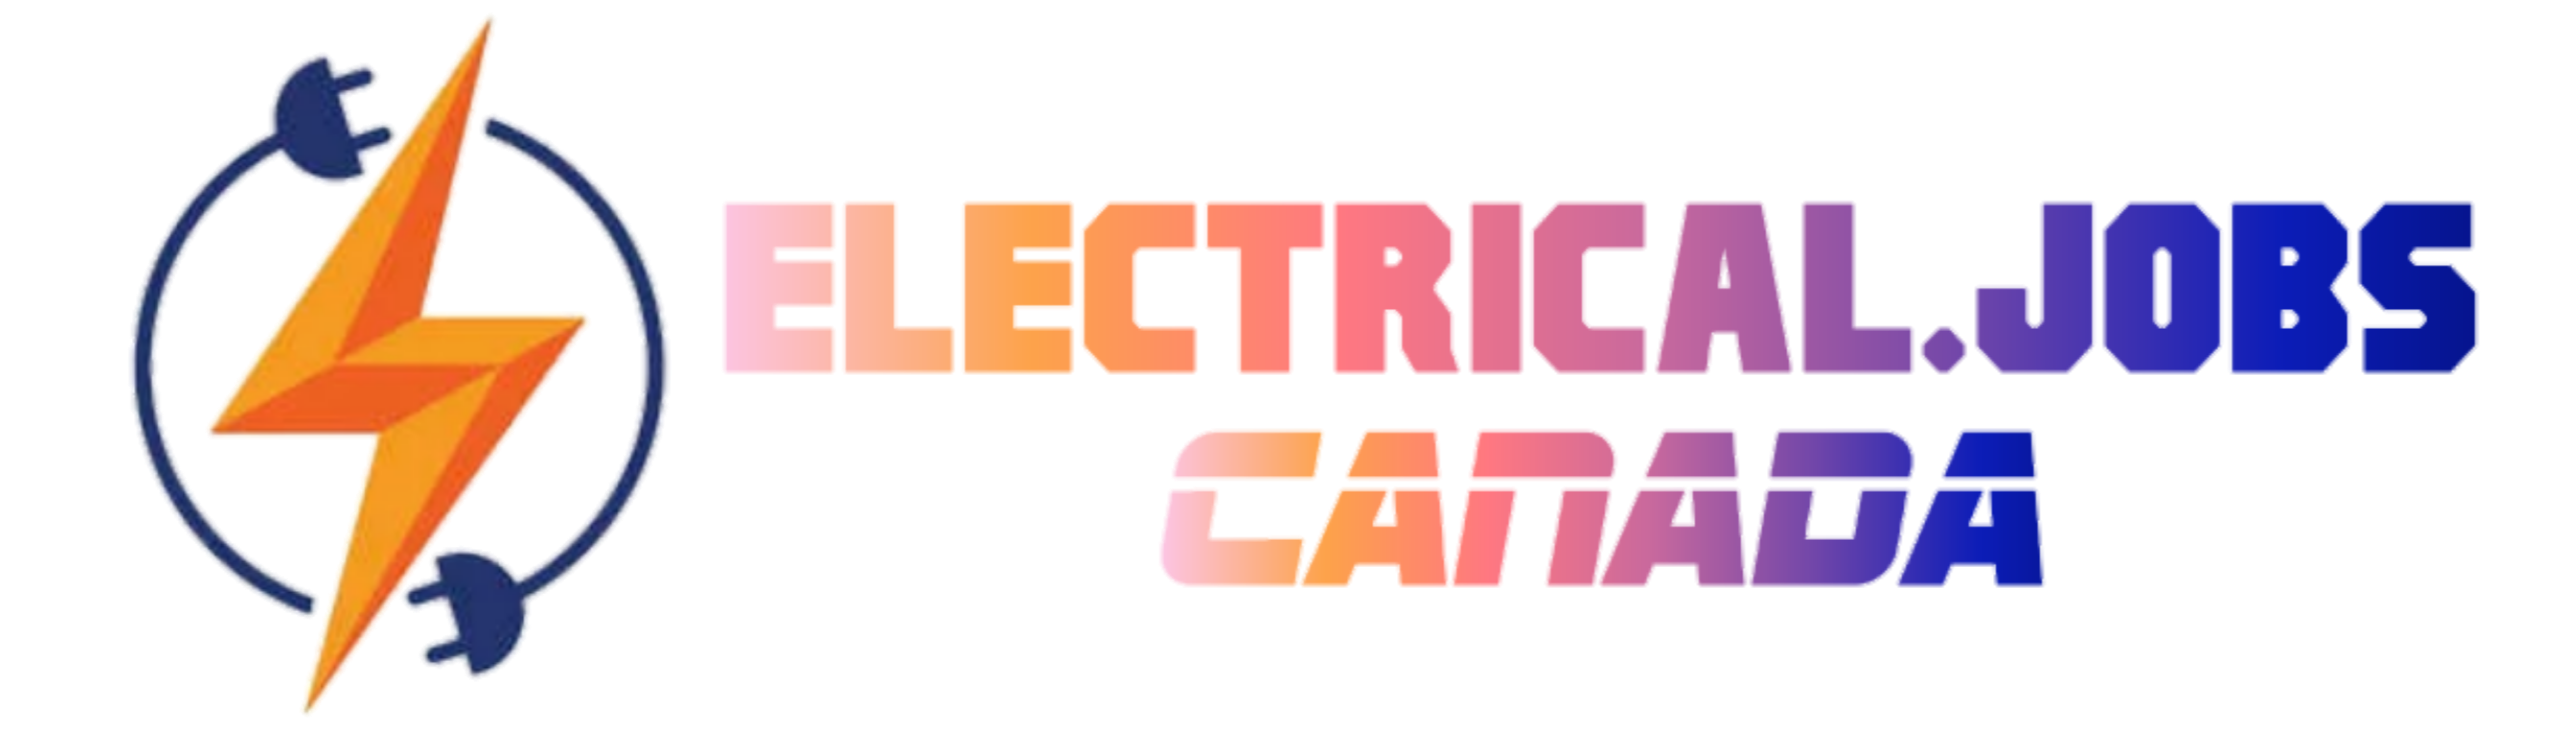 Electrical Jobs Canada